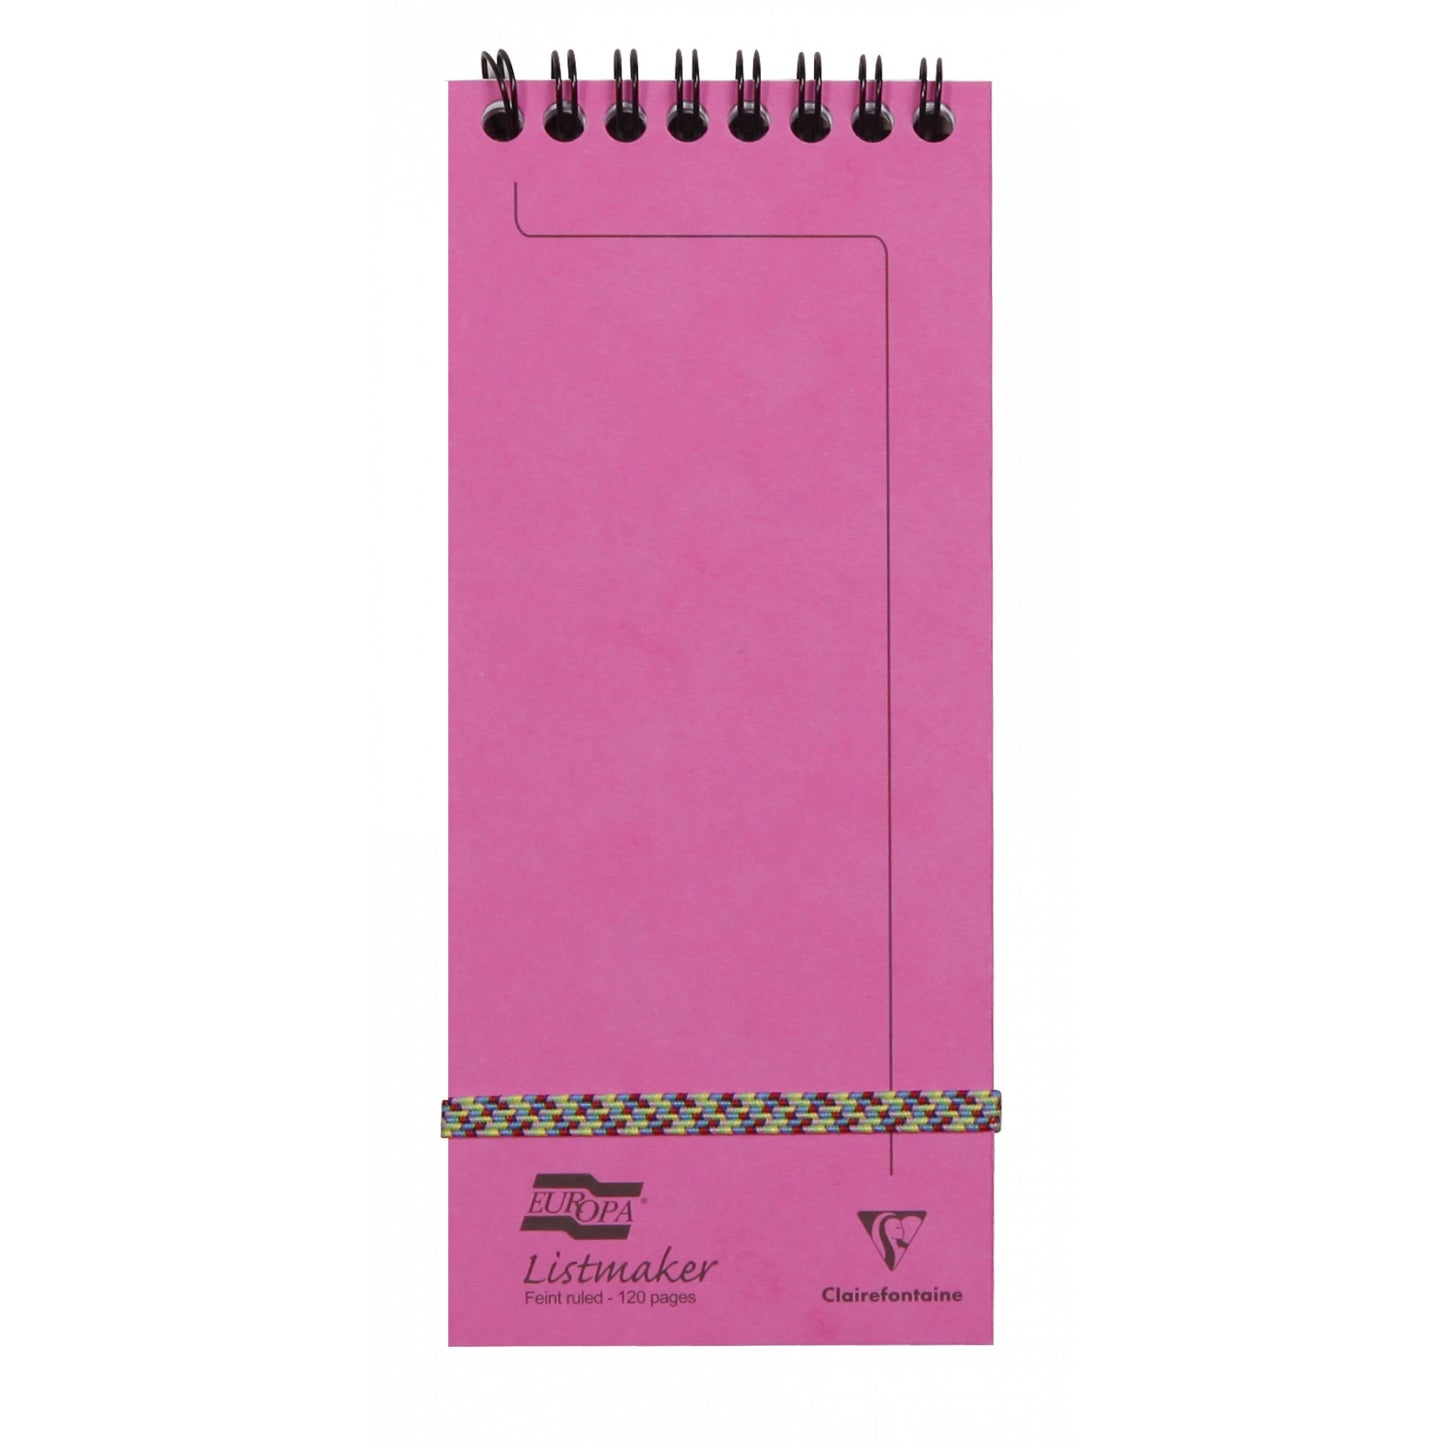 Clairefontaine #482/1111Z Europa Listmaker Lined Notepad (3 x 7) - Pink